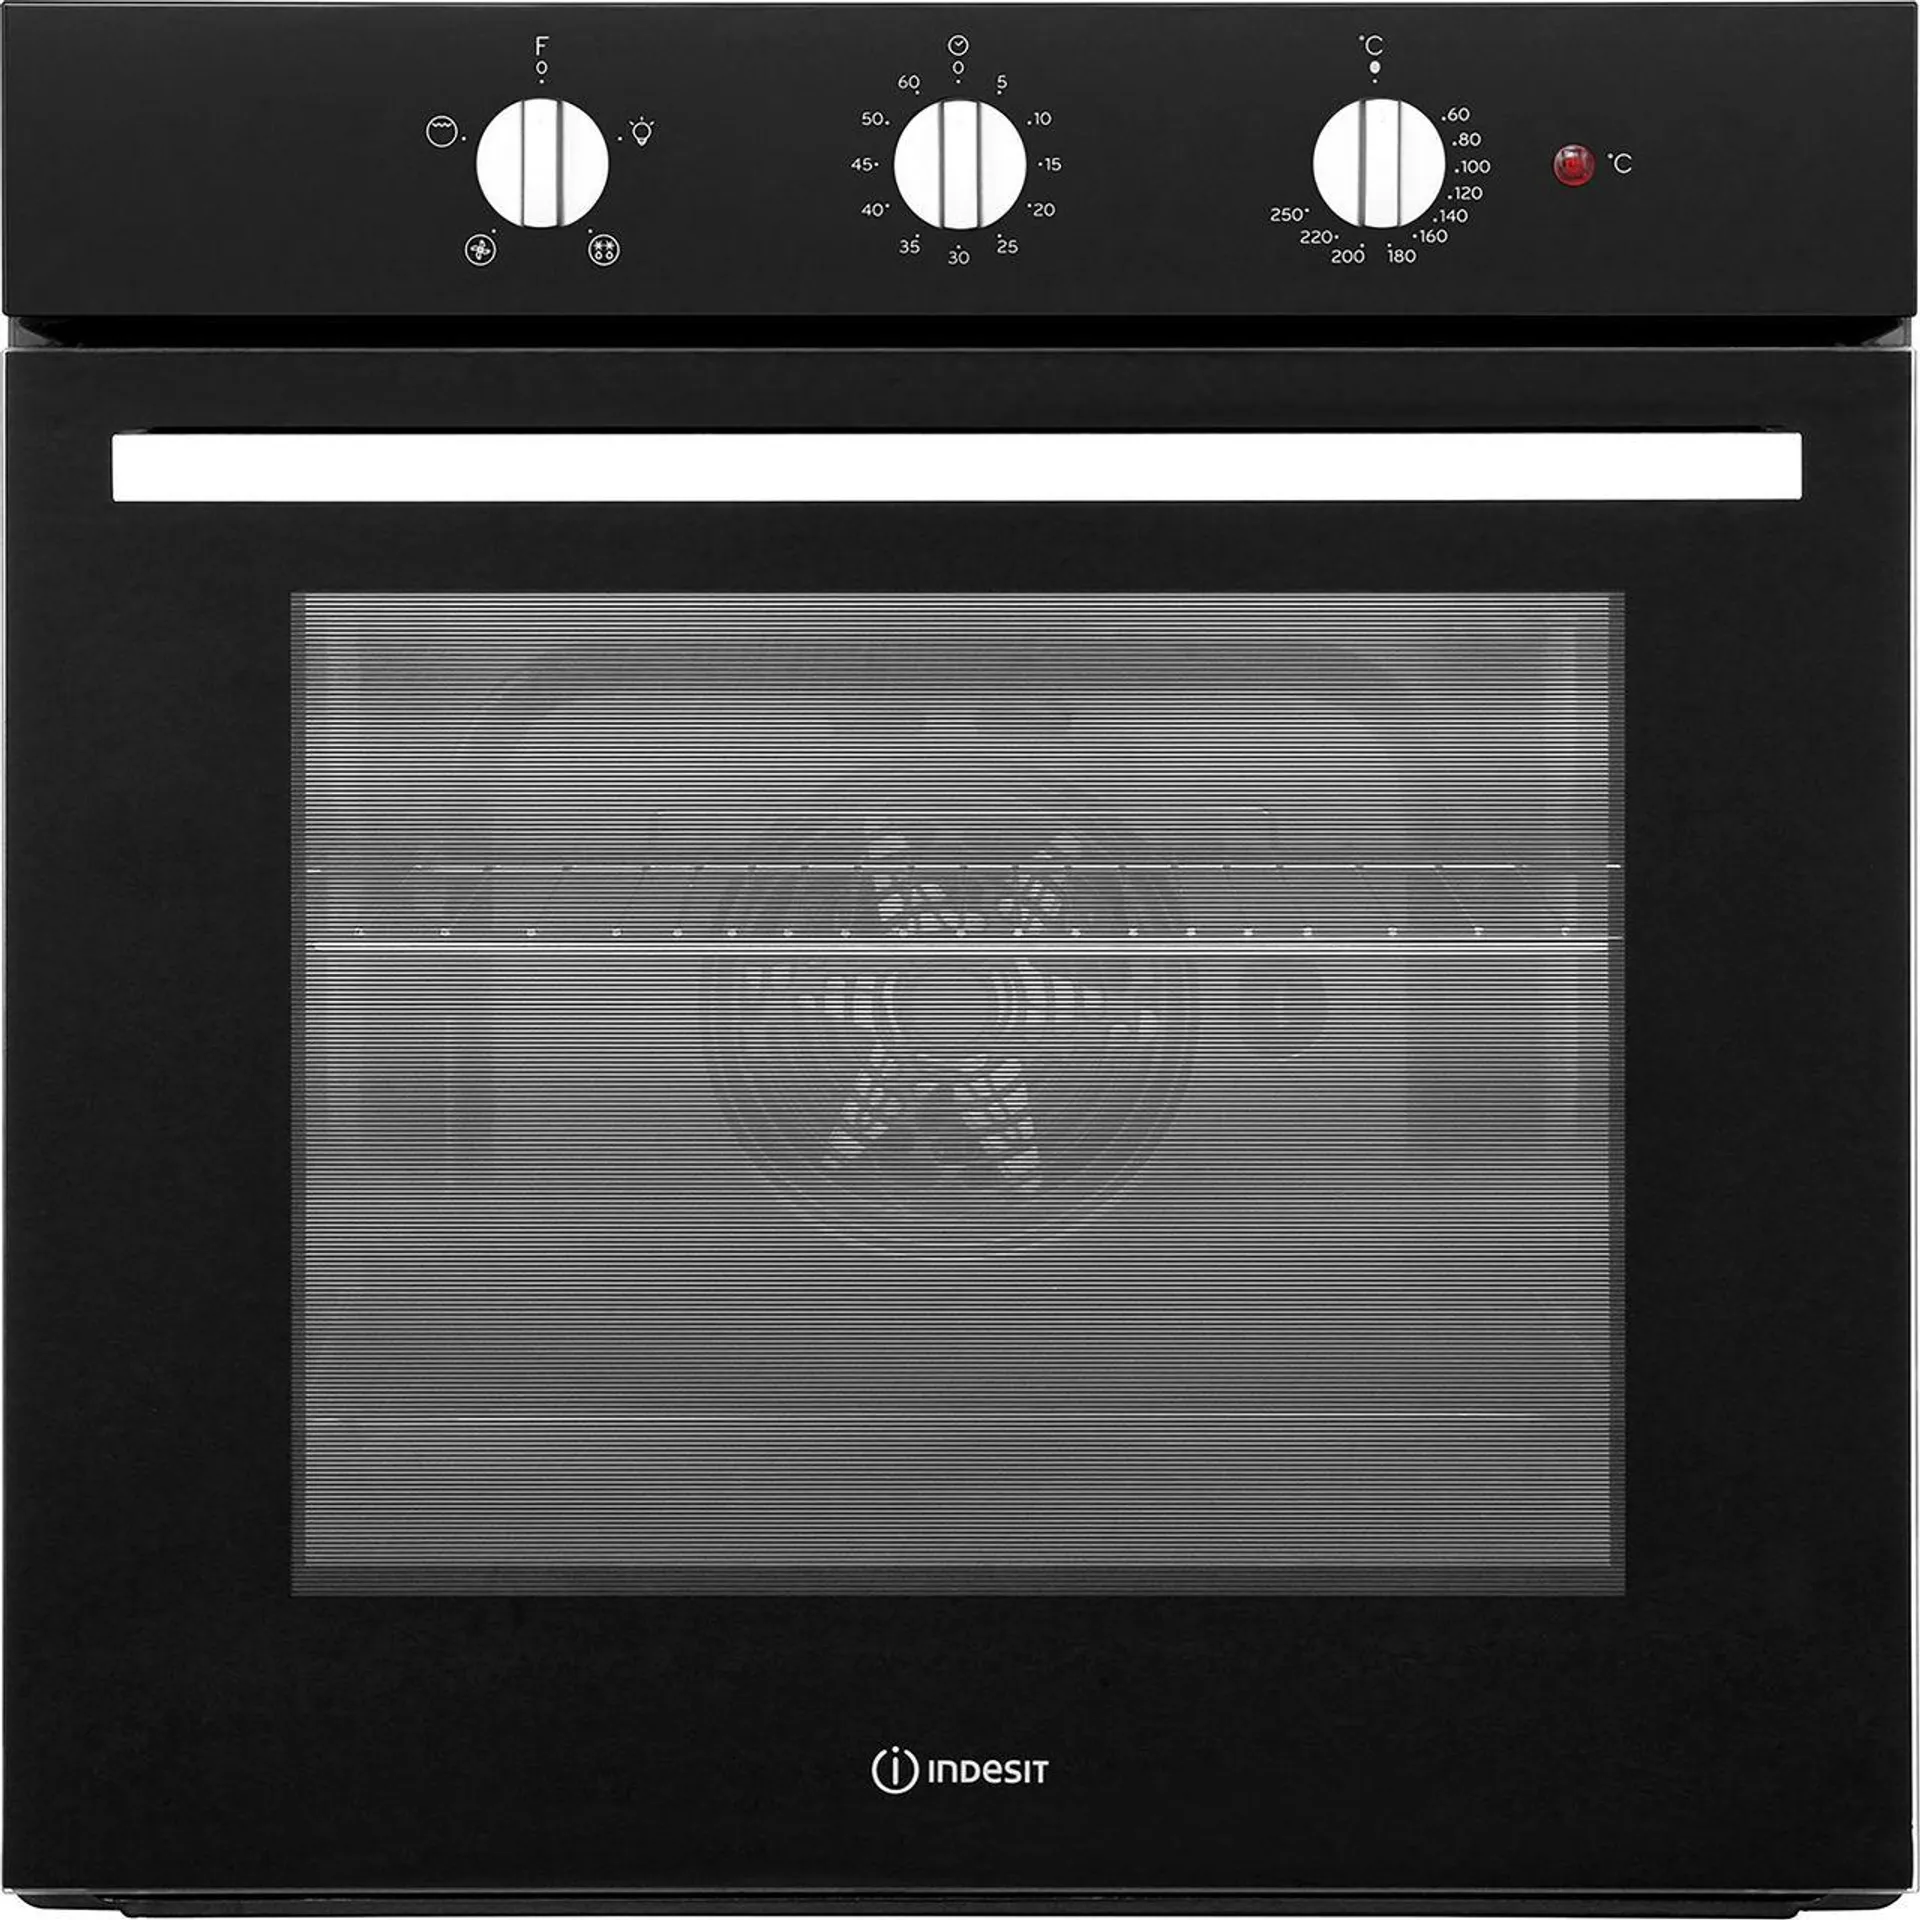 Indesit Aria IFW6330BL Built In Electric Single Oven - Black - A Rated